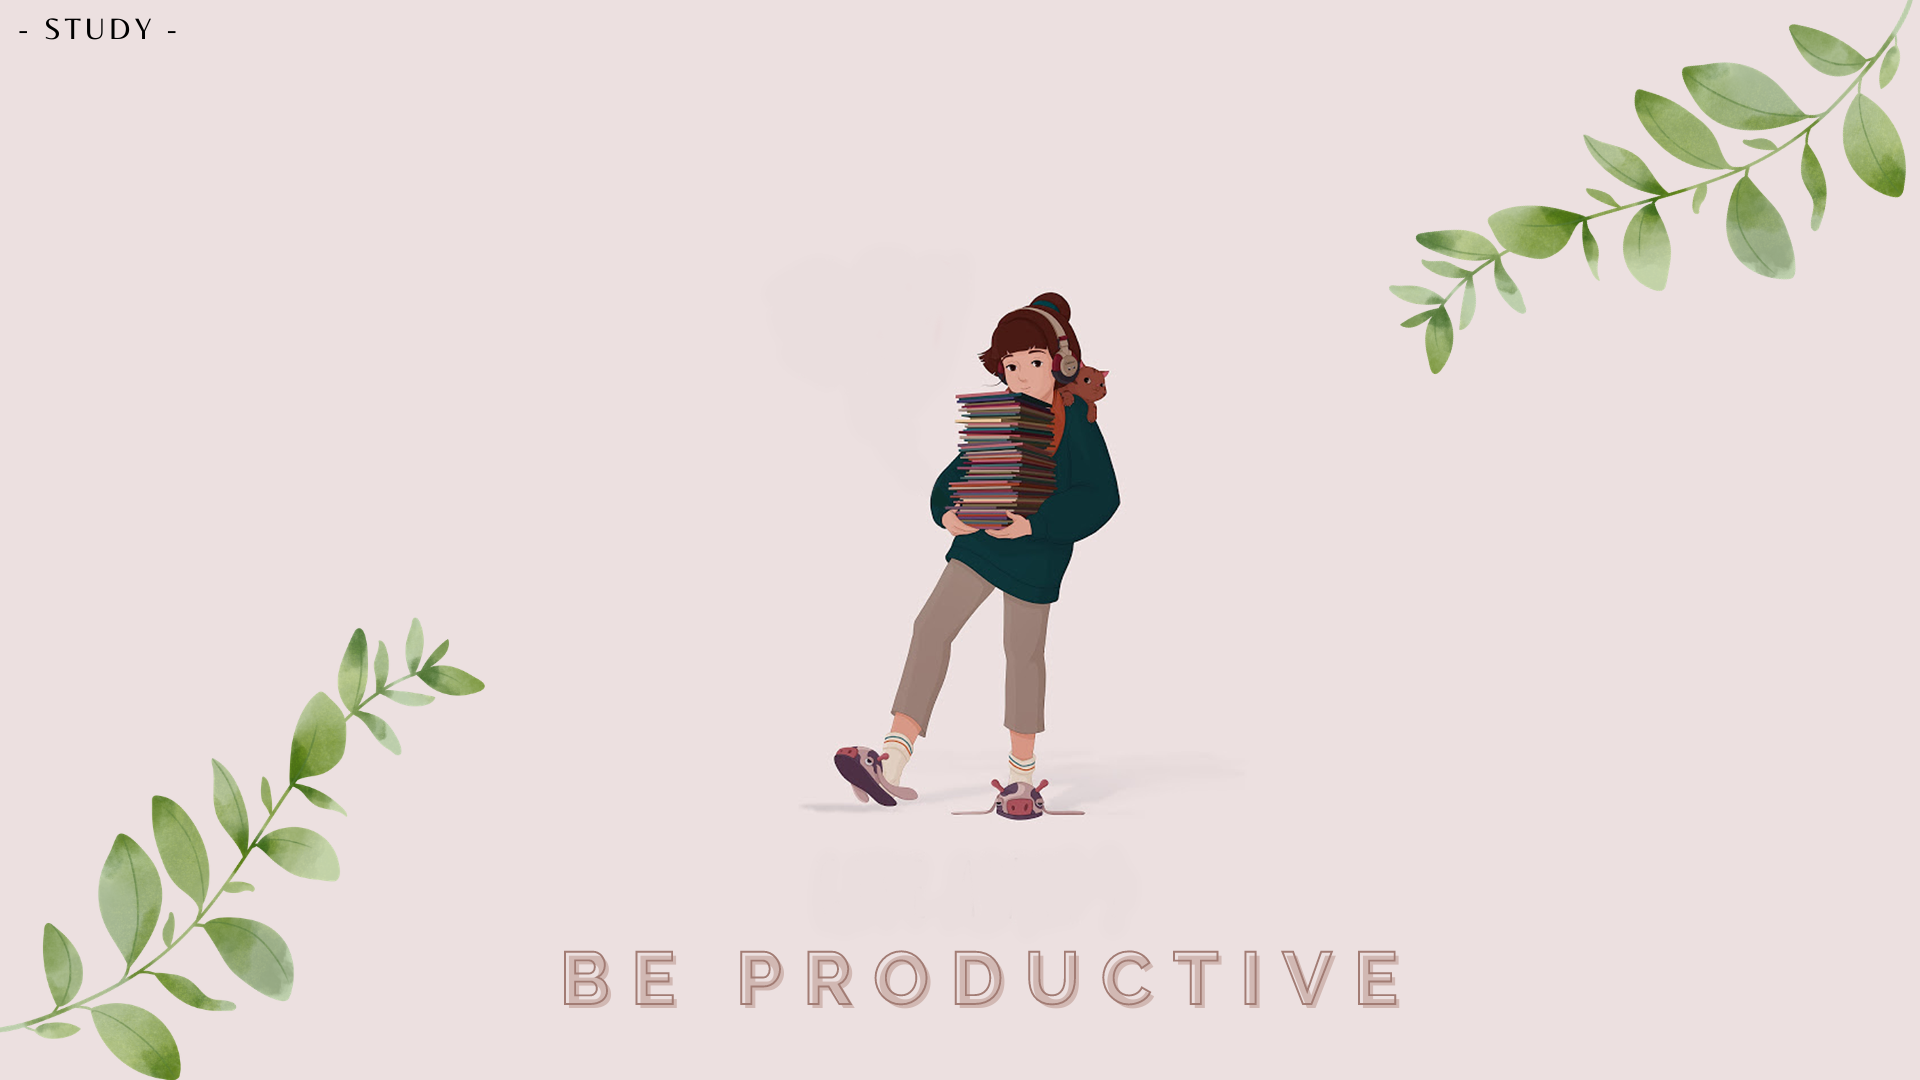 Productivity Wallpapers